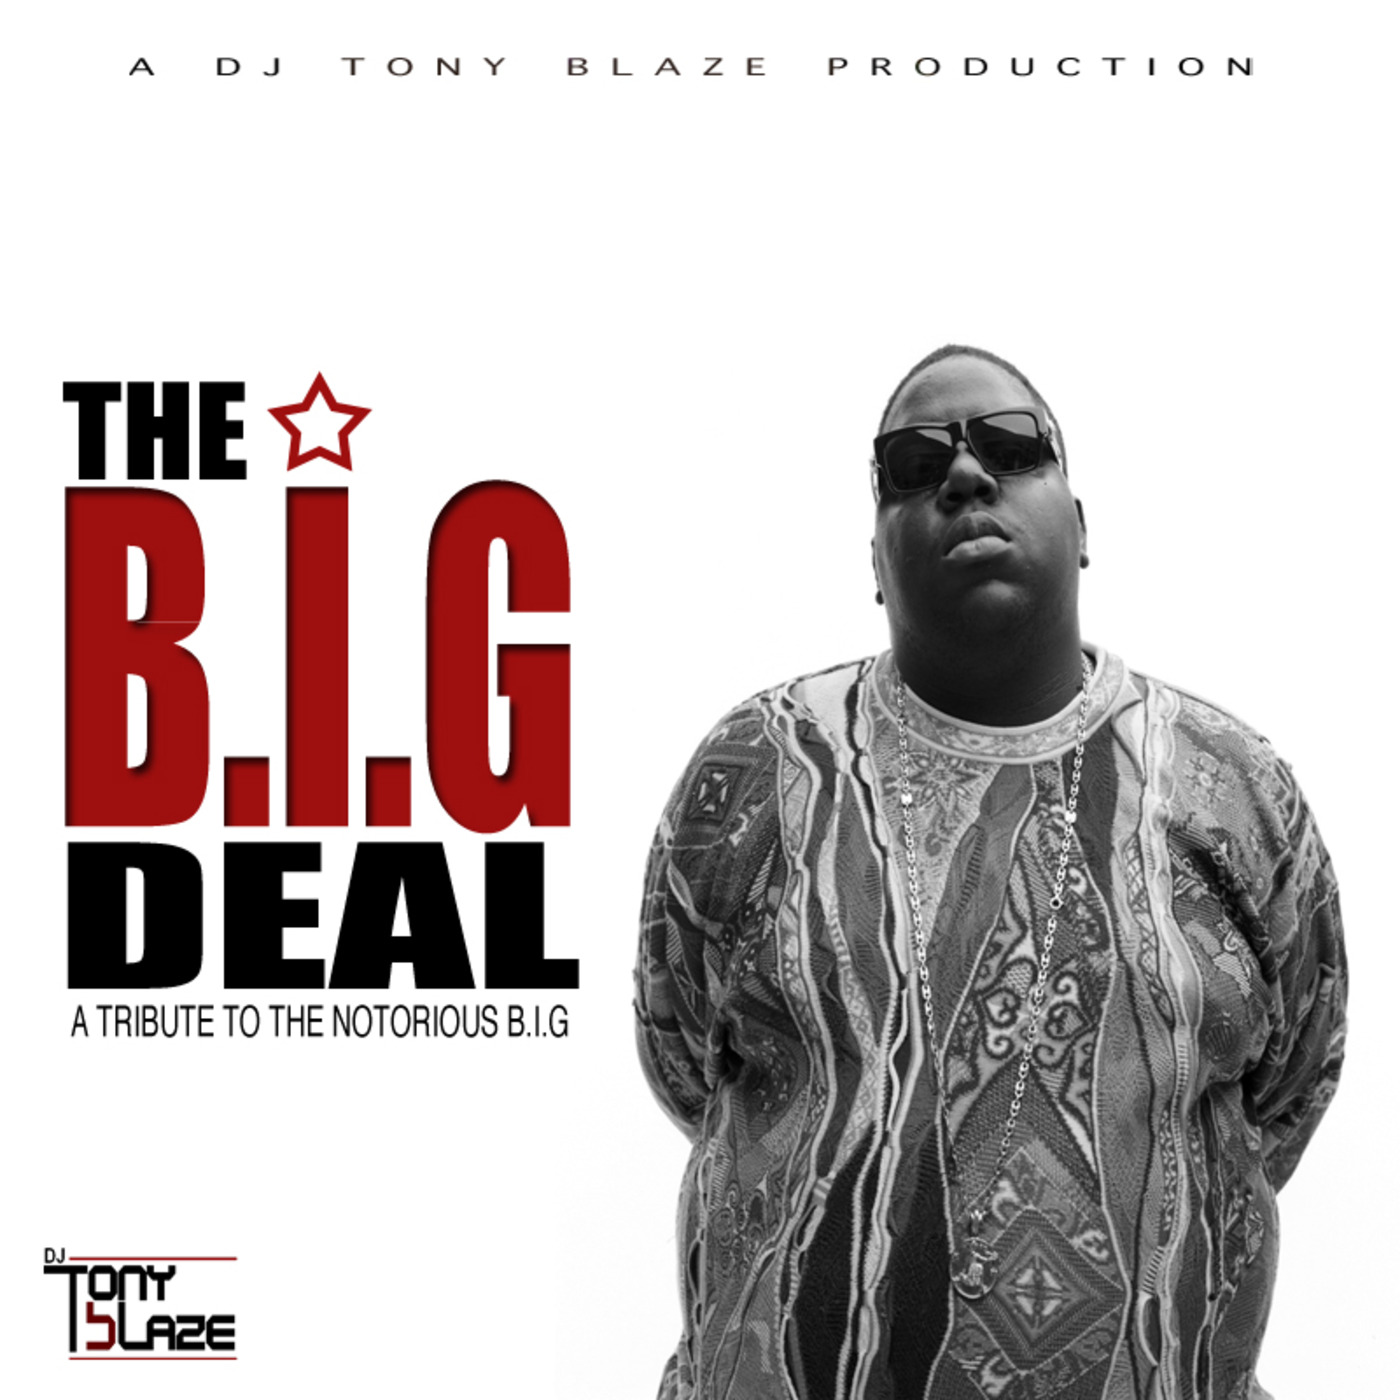 THE NOTORIOUS B.I.G (TRIBUTE MIX)